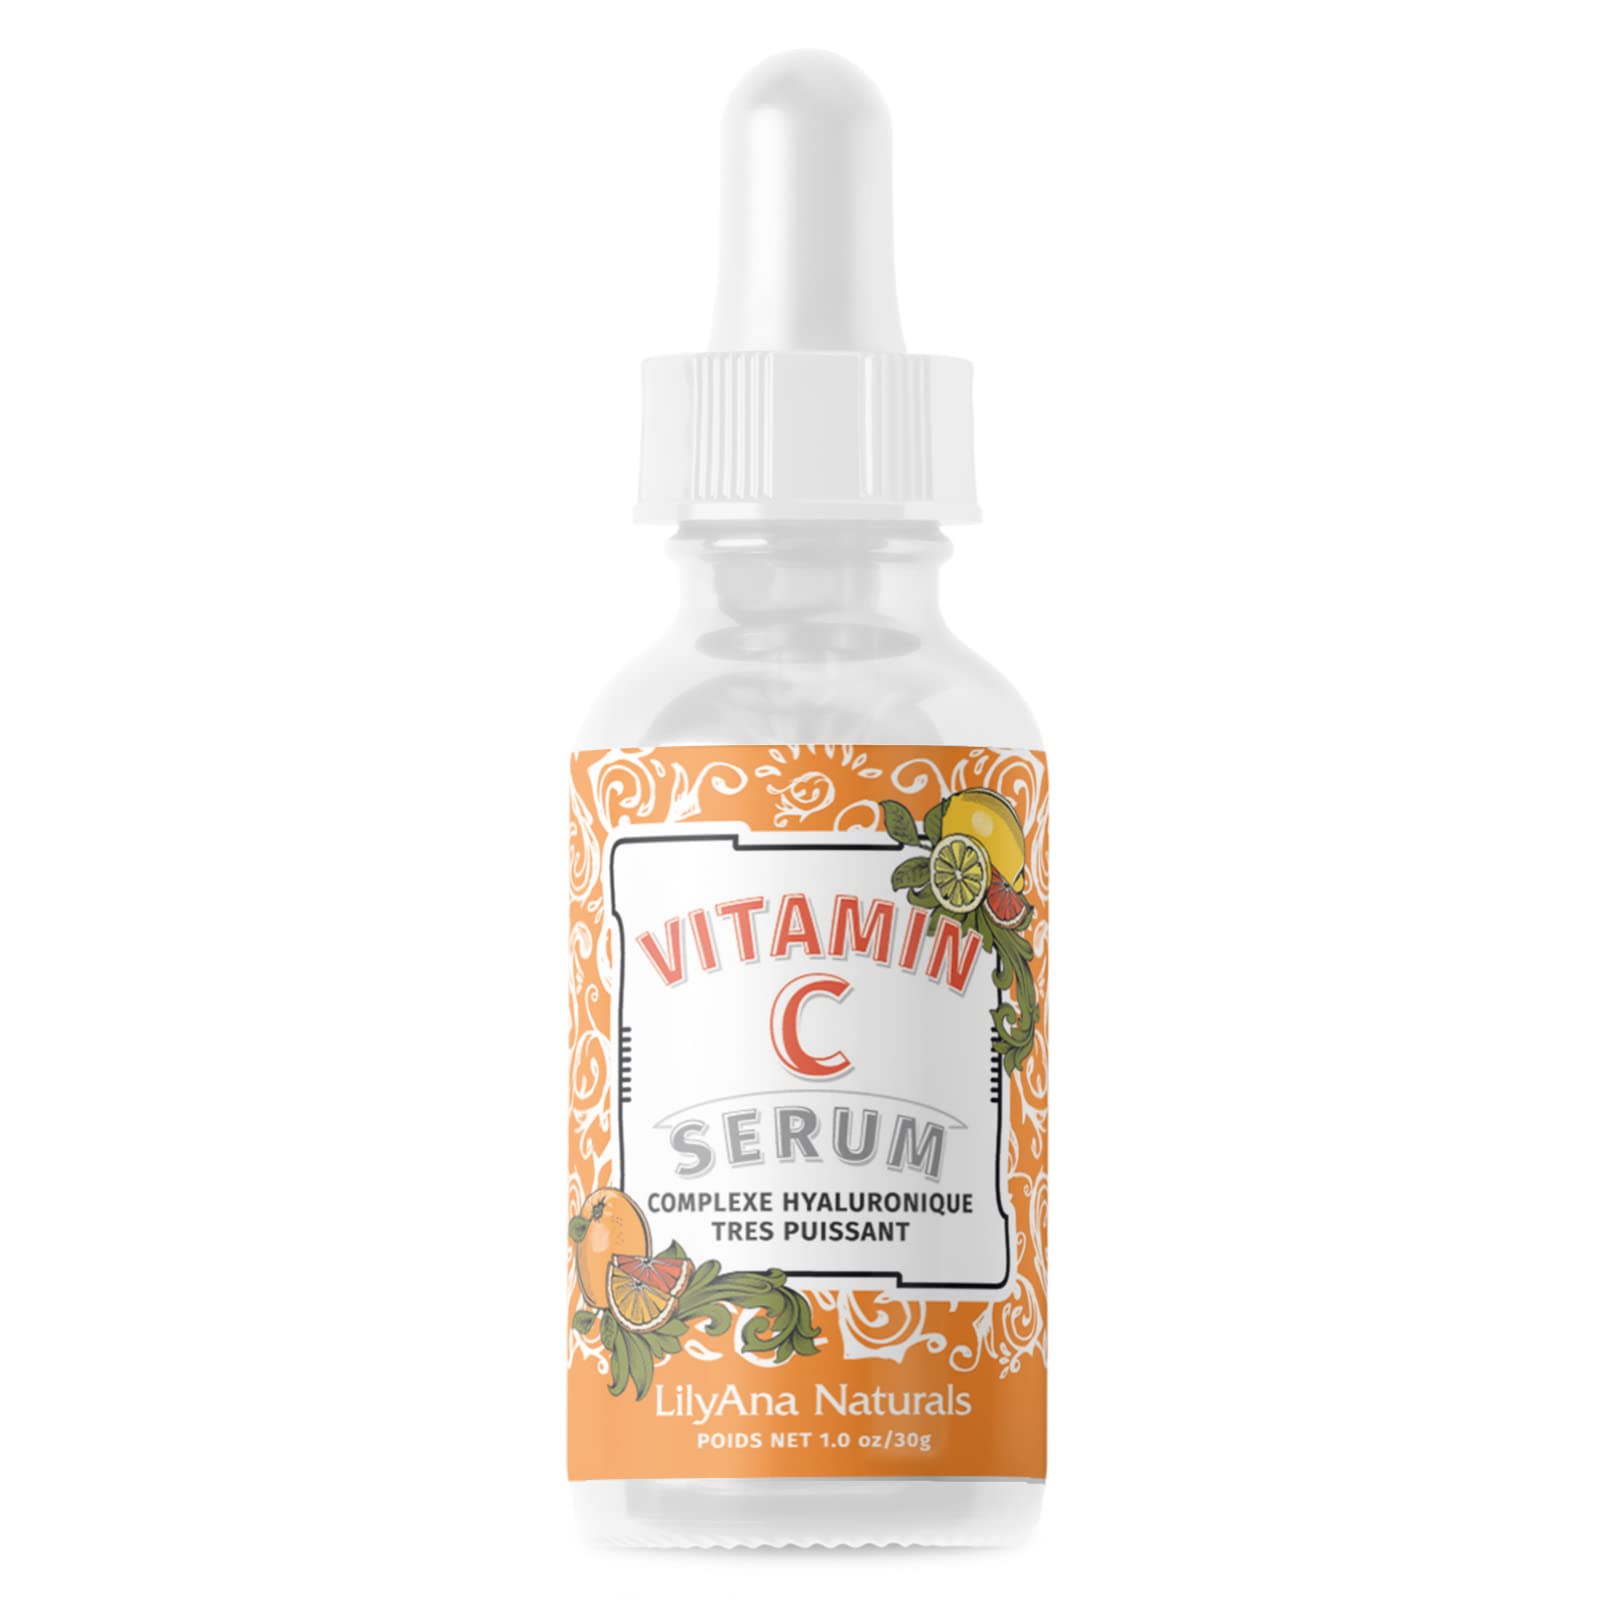 LilyAna Naturals Vitamin C Serum for Face - Face Serum with Hyaluronic Acid and Vitamin E, Anti Aging Serum, Reduces Age Spots and Sun Damage, Promotes Collagen and Elastin - 1oz